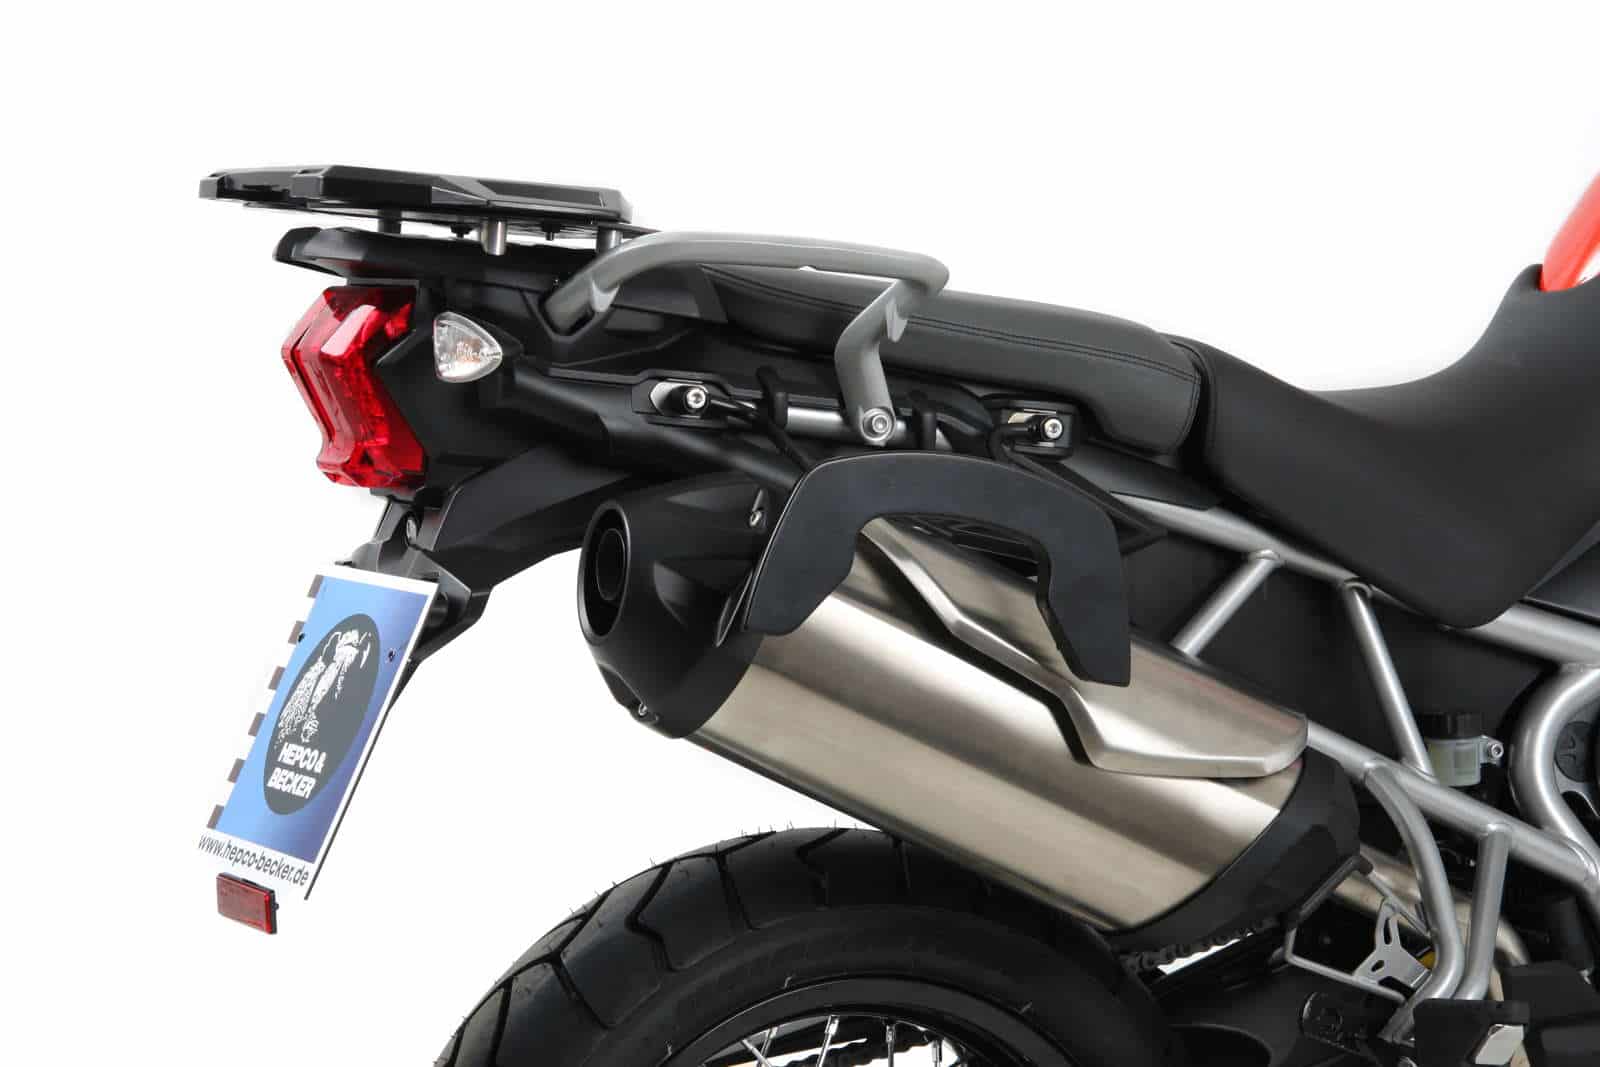 C-Bow sidecarrier for Triumph Tiger 800/XC (2010-2014)